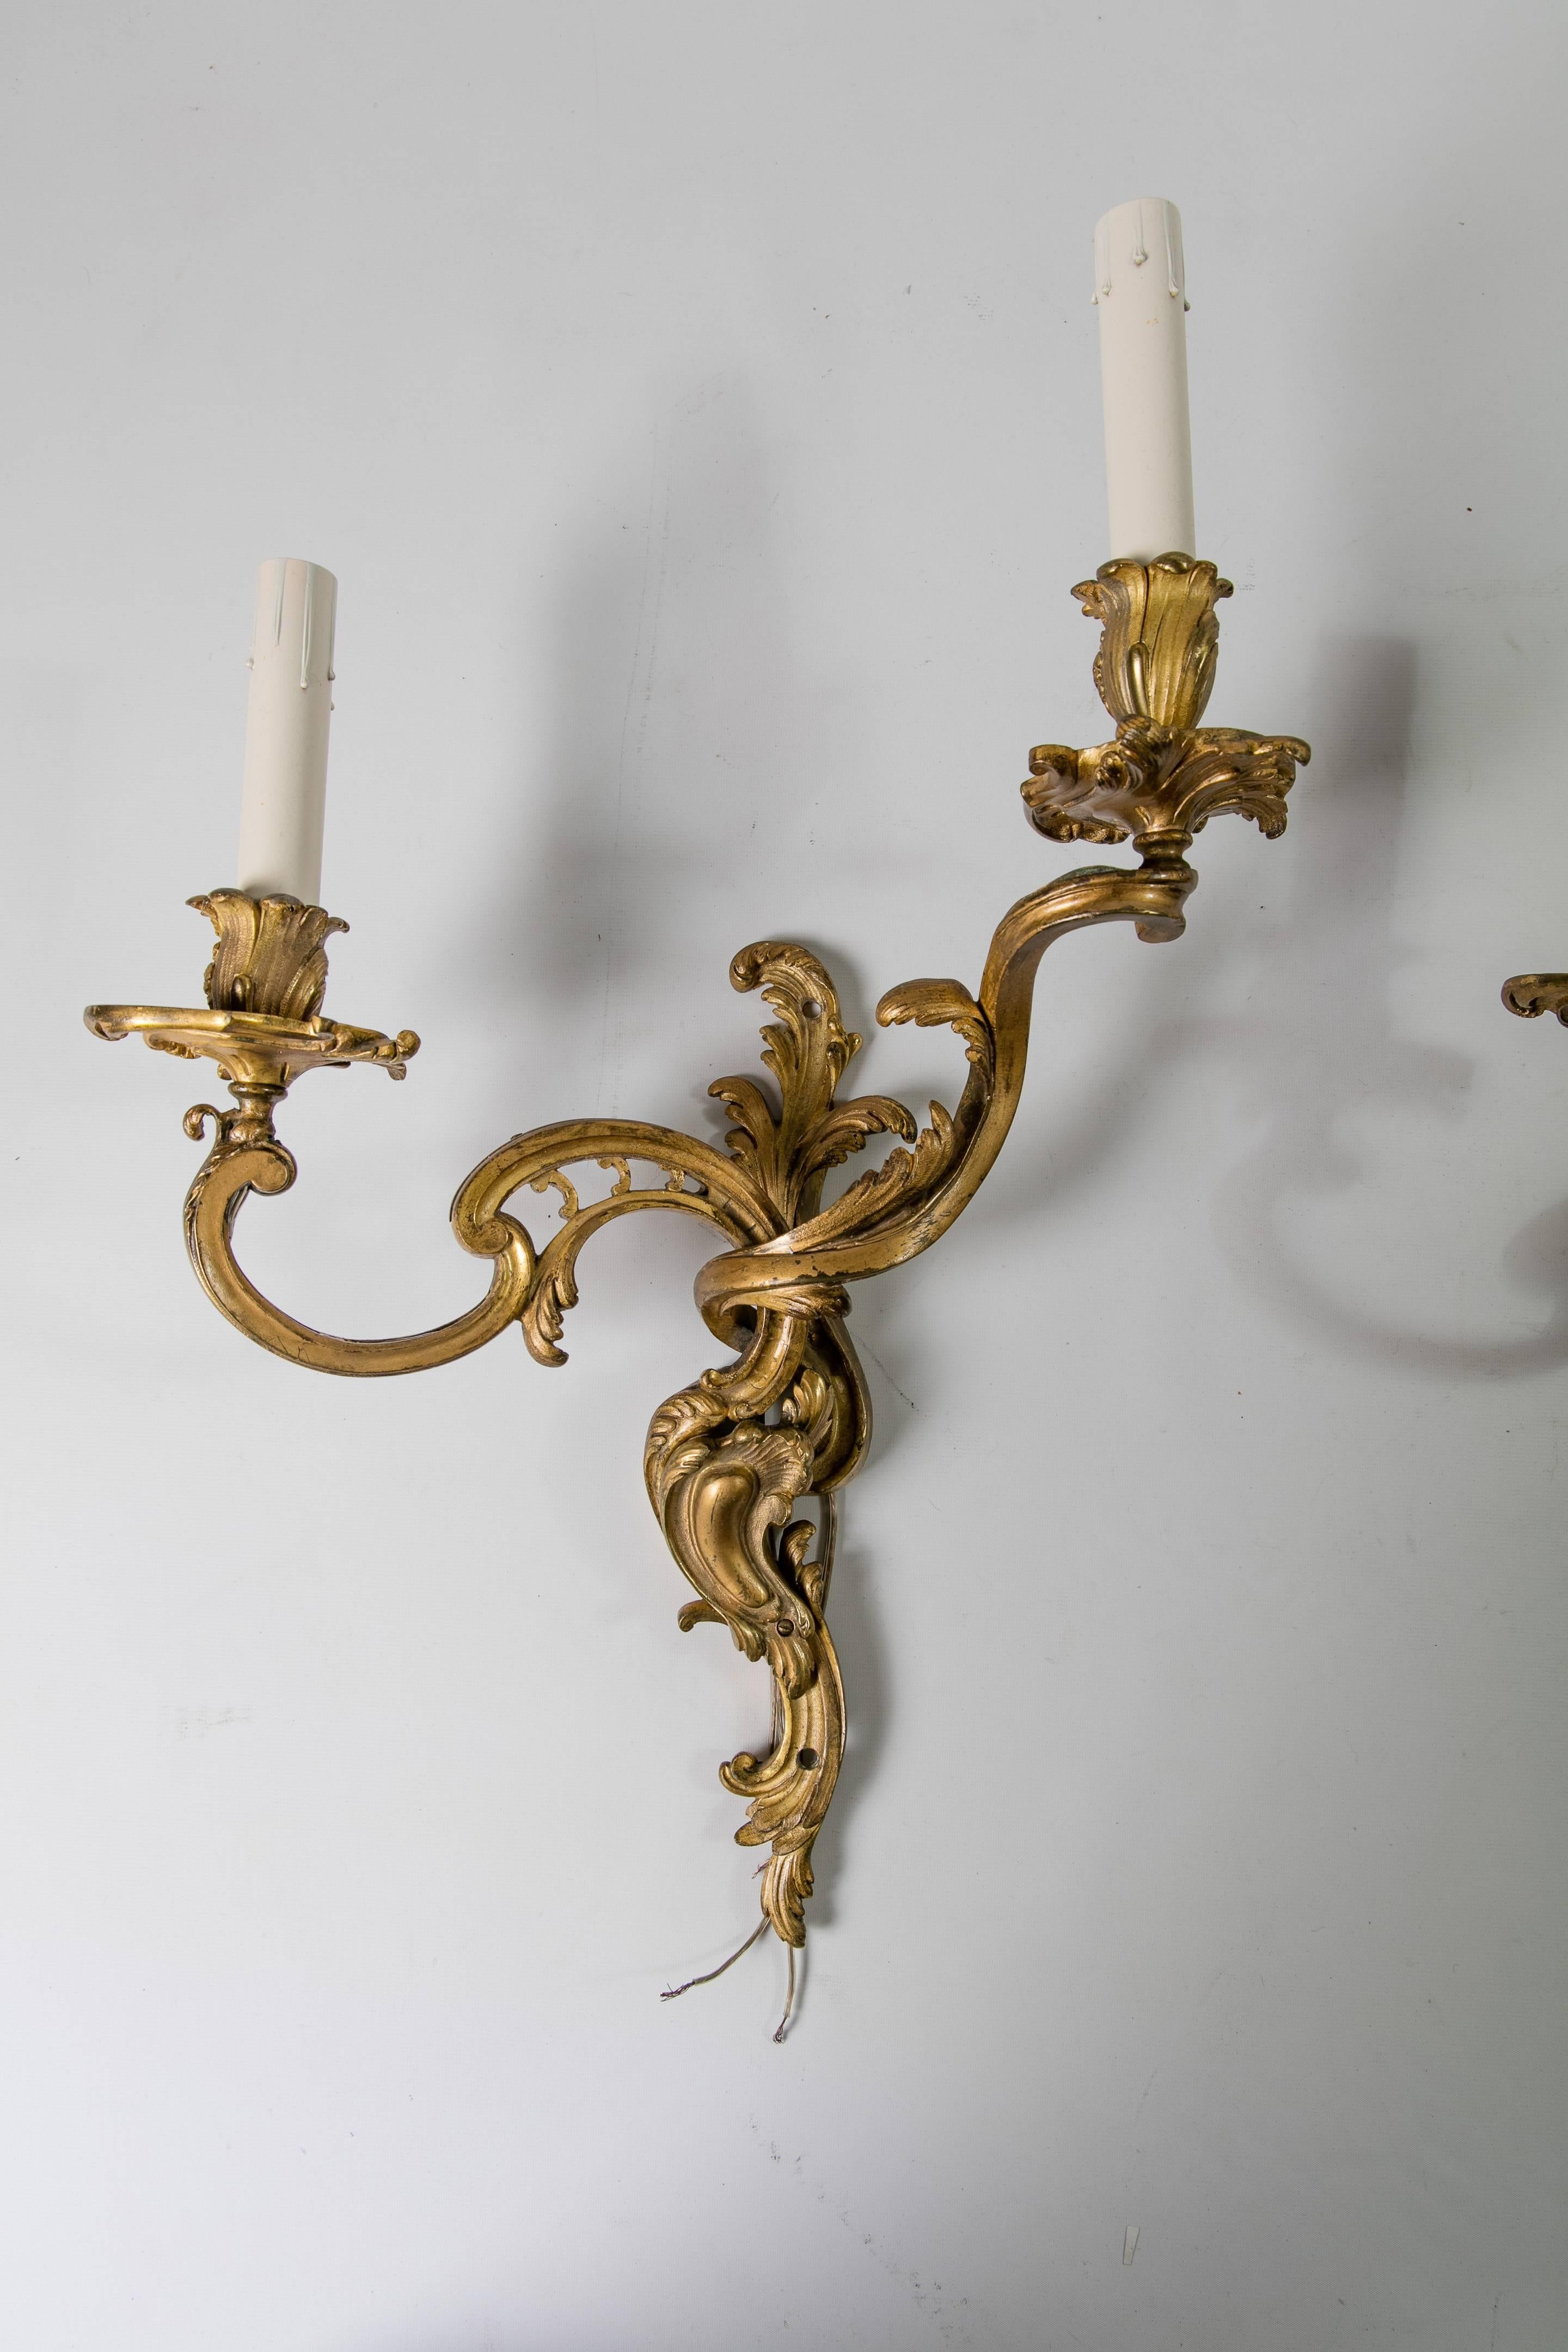 A pair of late 19th century gilded bronze wall sconces from France in the style of P. E. Guerin. The sconces are in the Rococo style and have been newly electrified. Each sconce takes two 40-watt max bulbs. The backplate of each sconce has screw